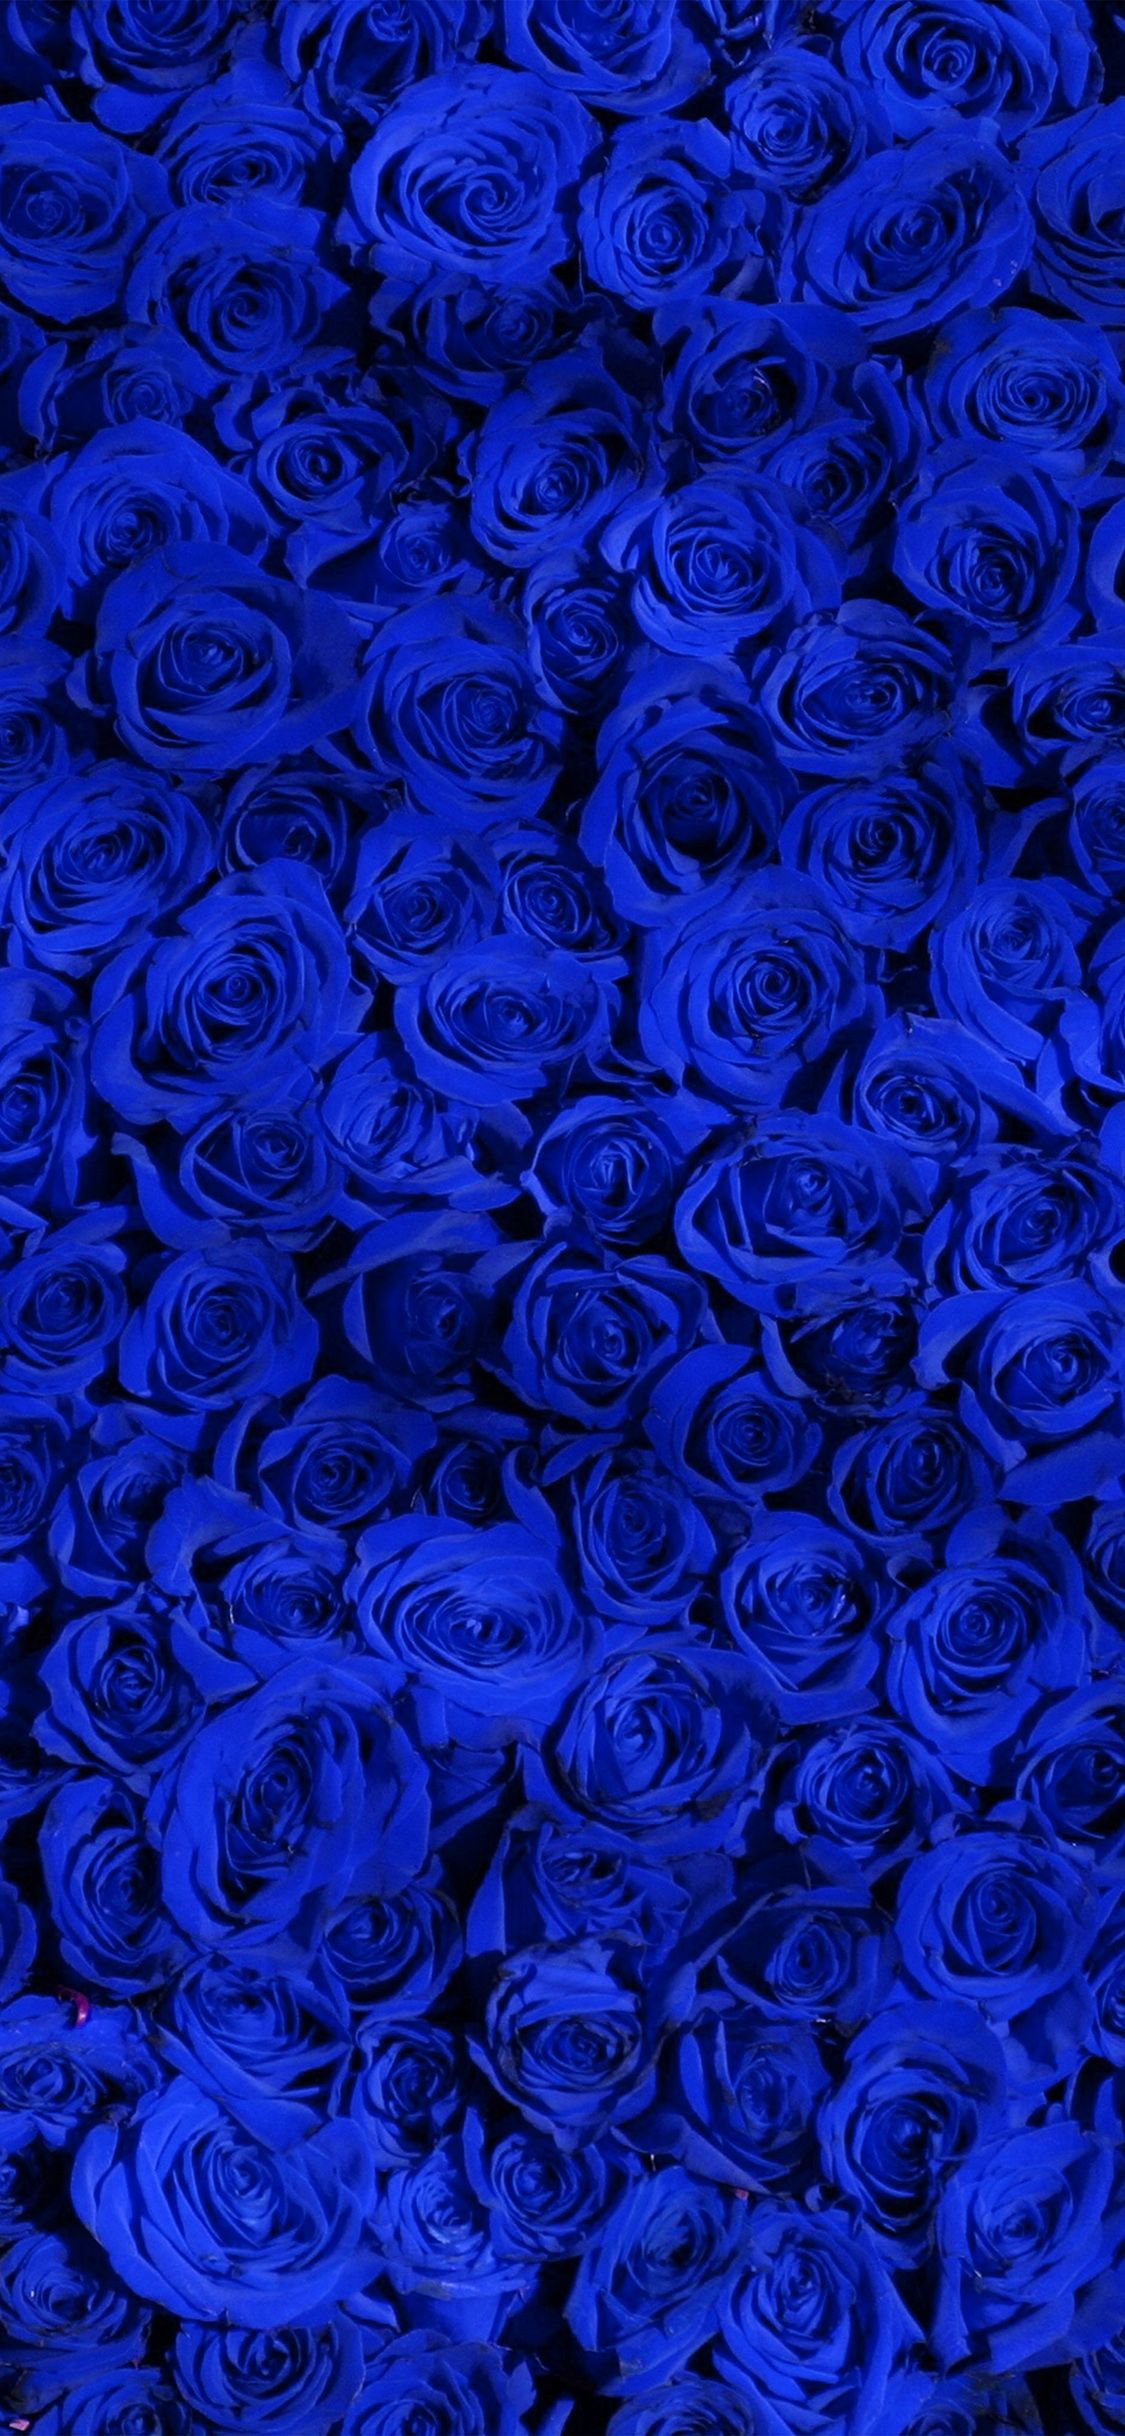 Blue roses iphone wallpapers